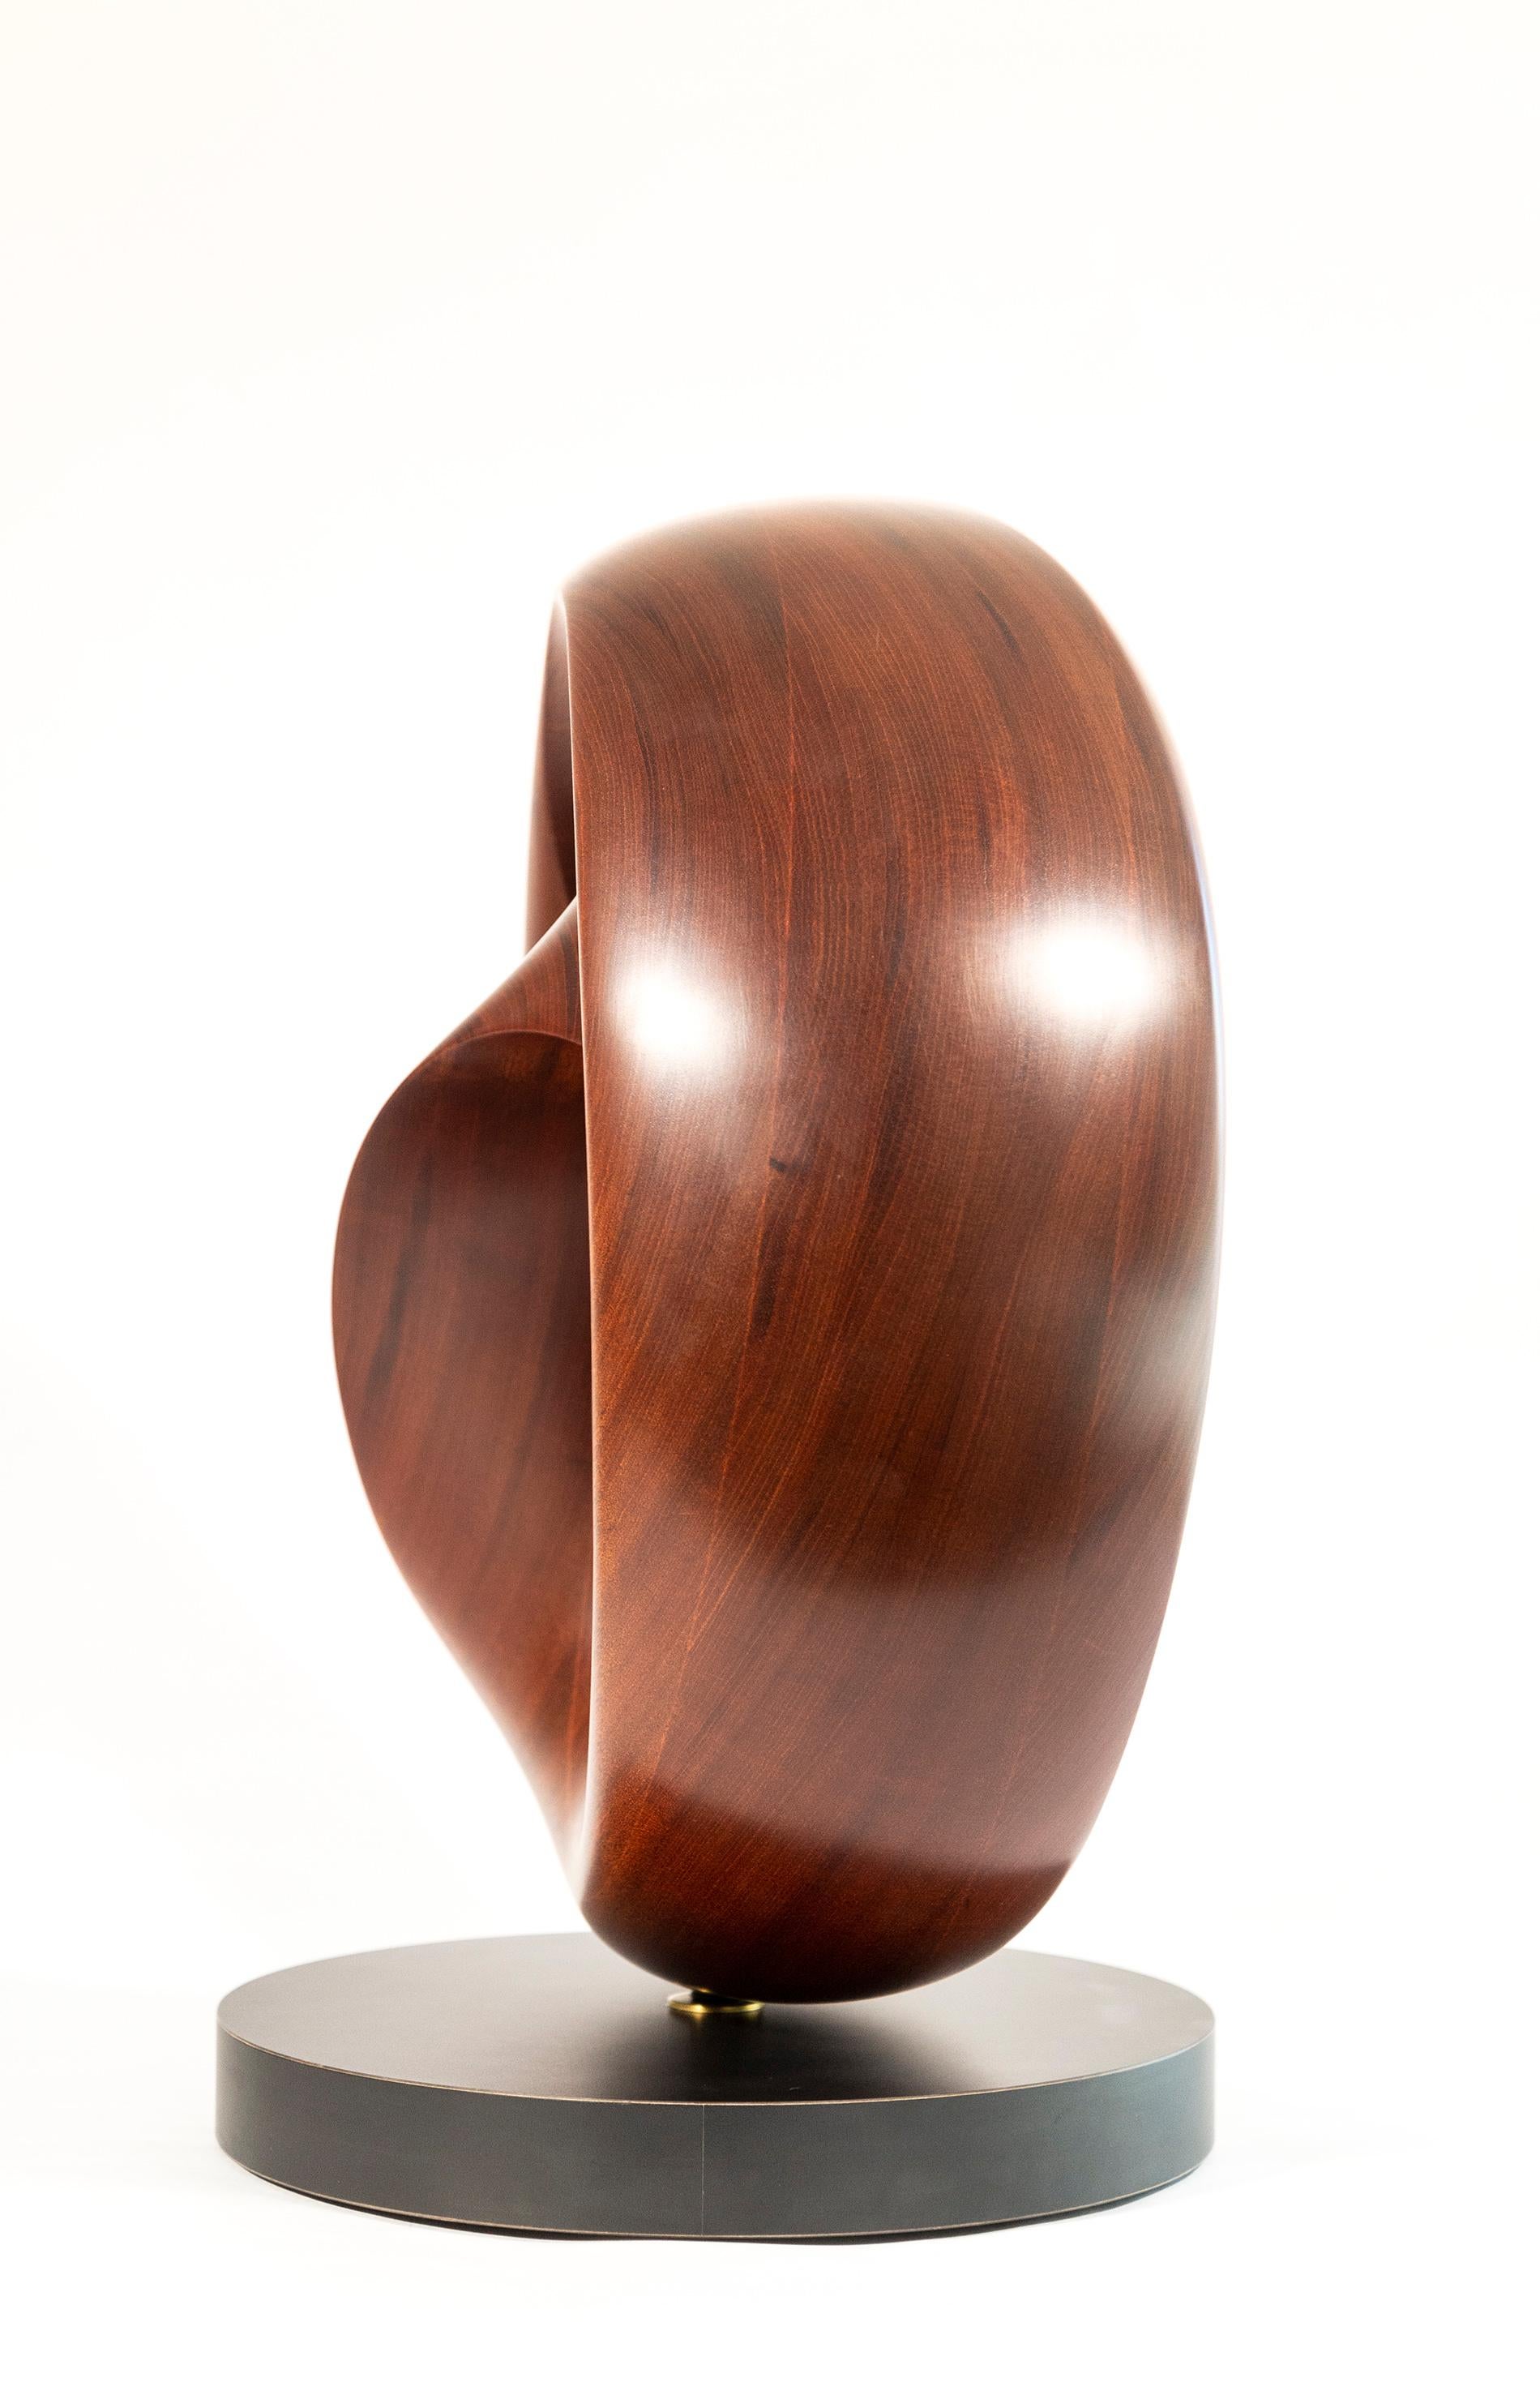 Fanfare - smooth, polished, abstract, contemporary, mahogany carved sculpture For Sale 2